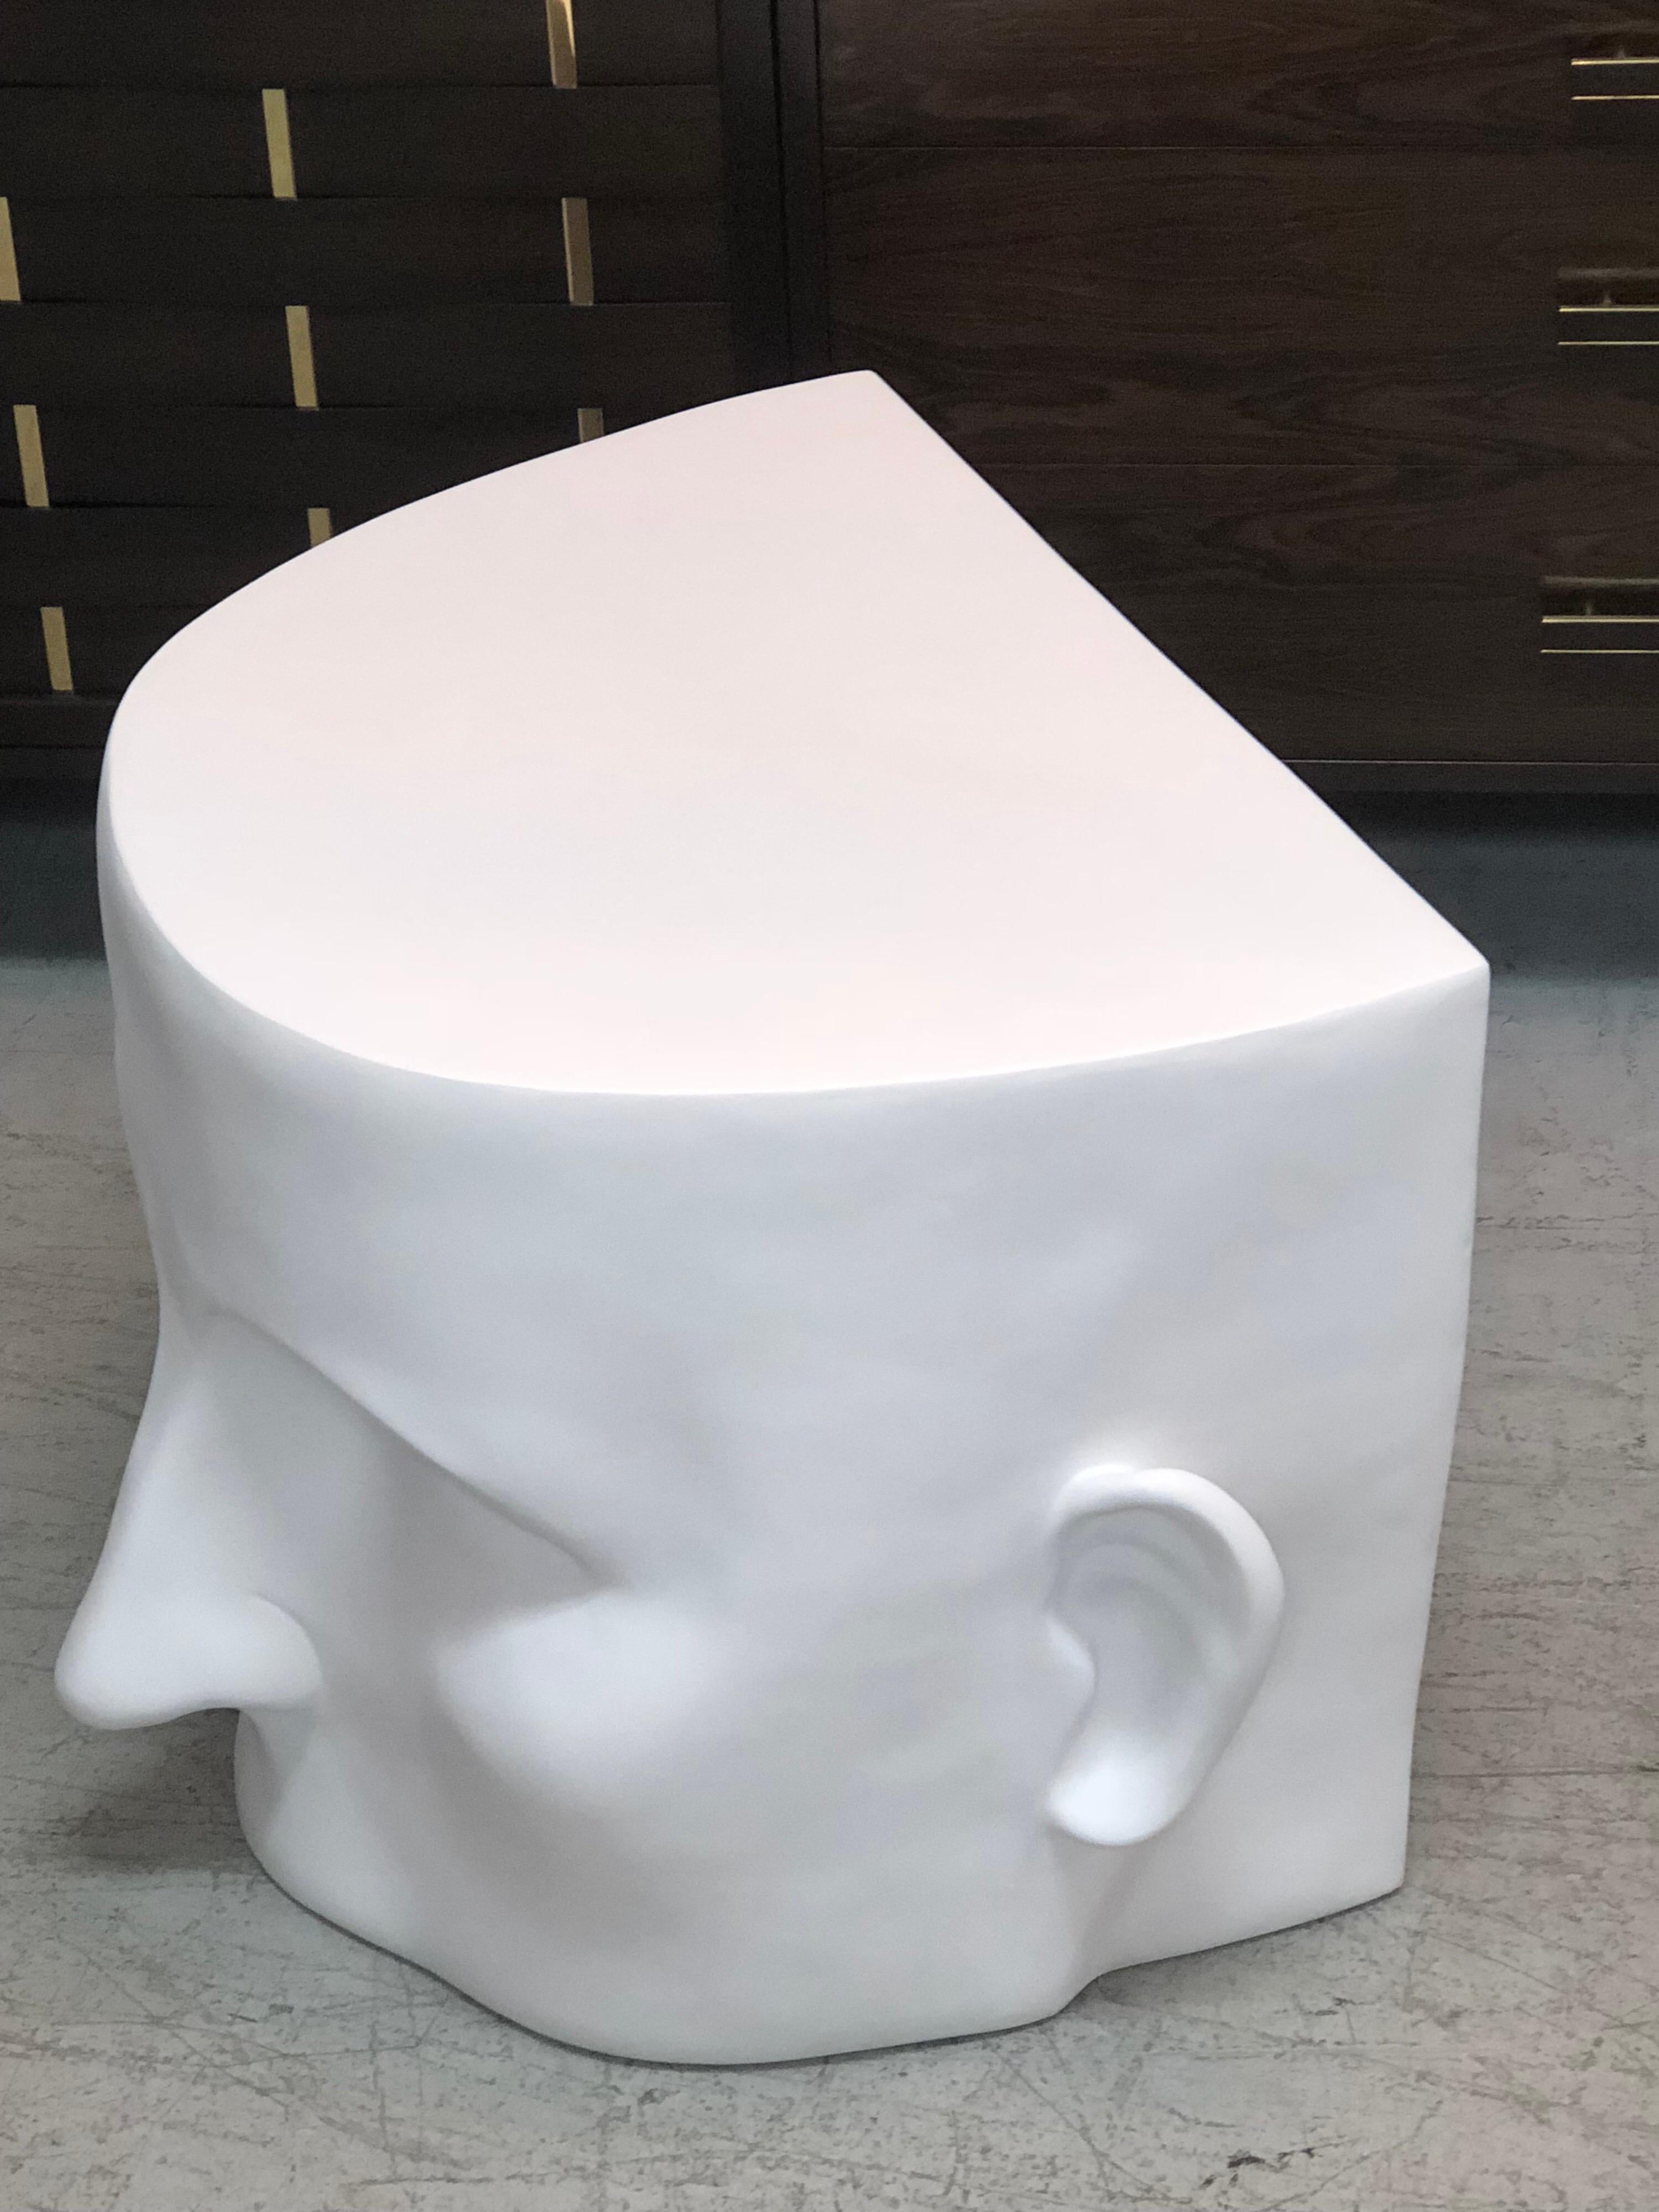 Resin Sculptural Head Architectural Table Bench, 1980s